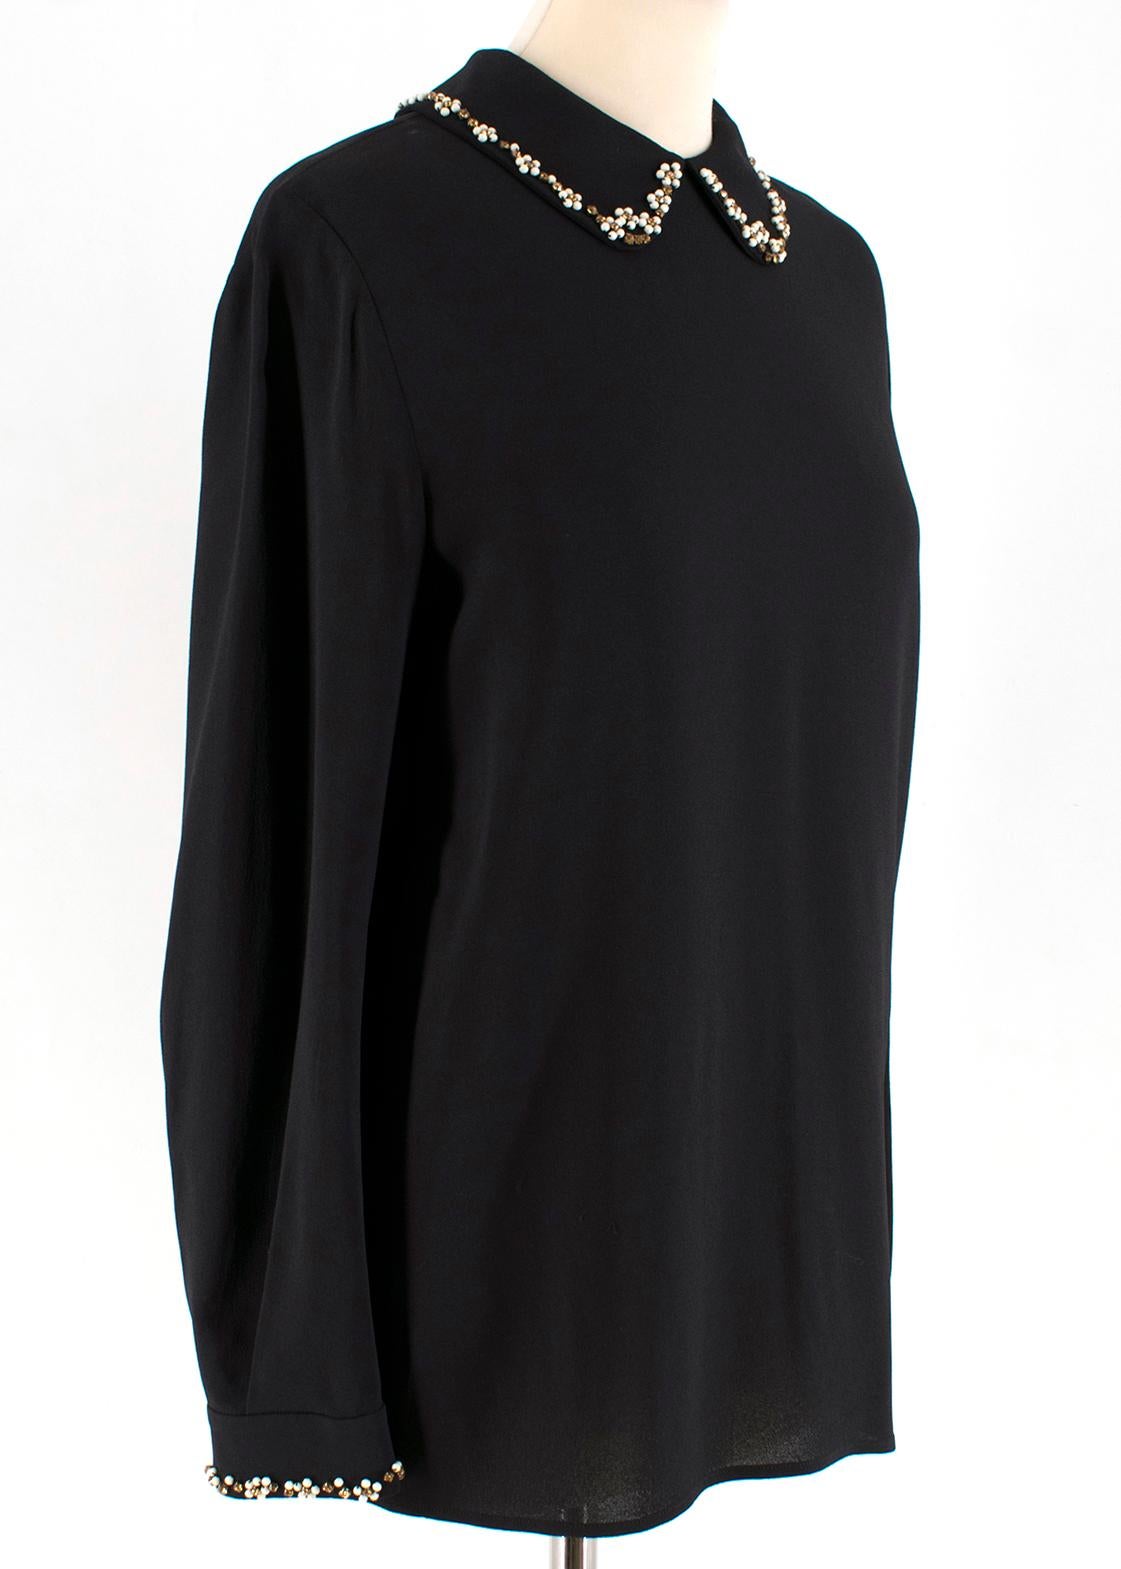 Miu Miu Black Crepe Collar Embellished Shirt

- black crepe shirt
- bead embellished collar and sleeve trim in floral motive
- lonhsleeve
- button fastening to the back
- lightweight 

The seller usually wears XS size.

Please note, these items are